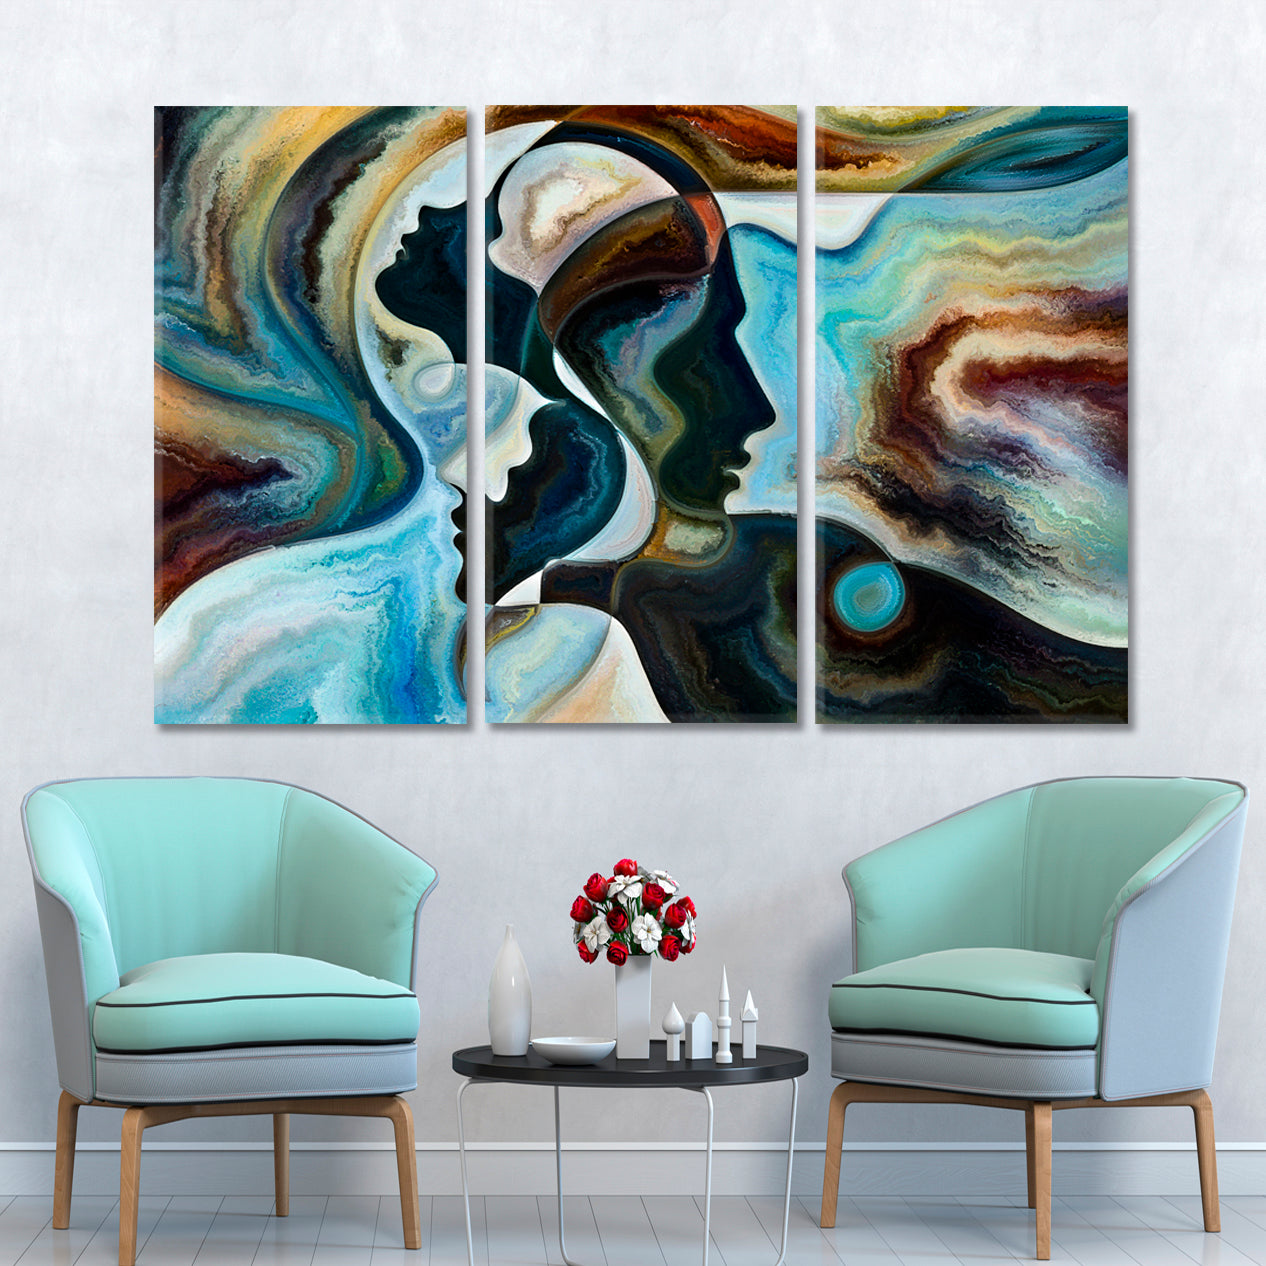 UNITY AND BIRTH OF LIFE Modern Abstract Painting Consciousness Art Artesty 3 panels 36" x 24" 